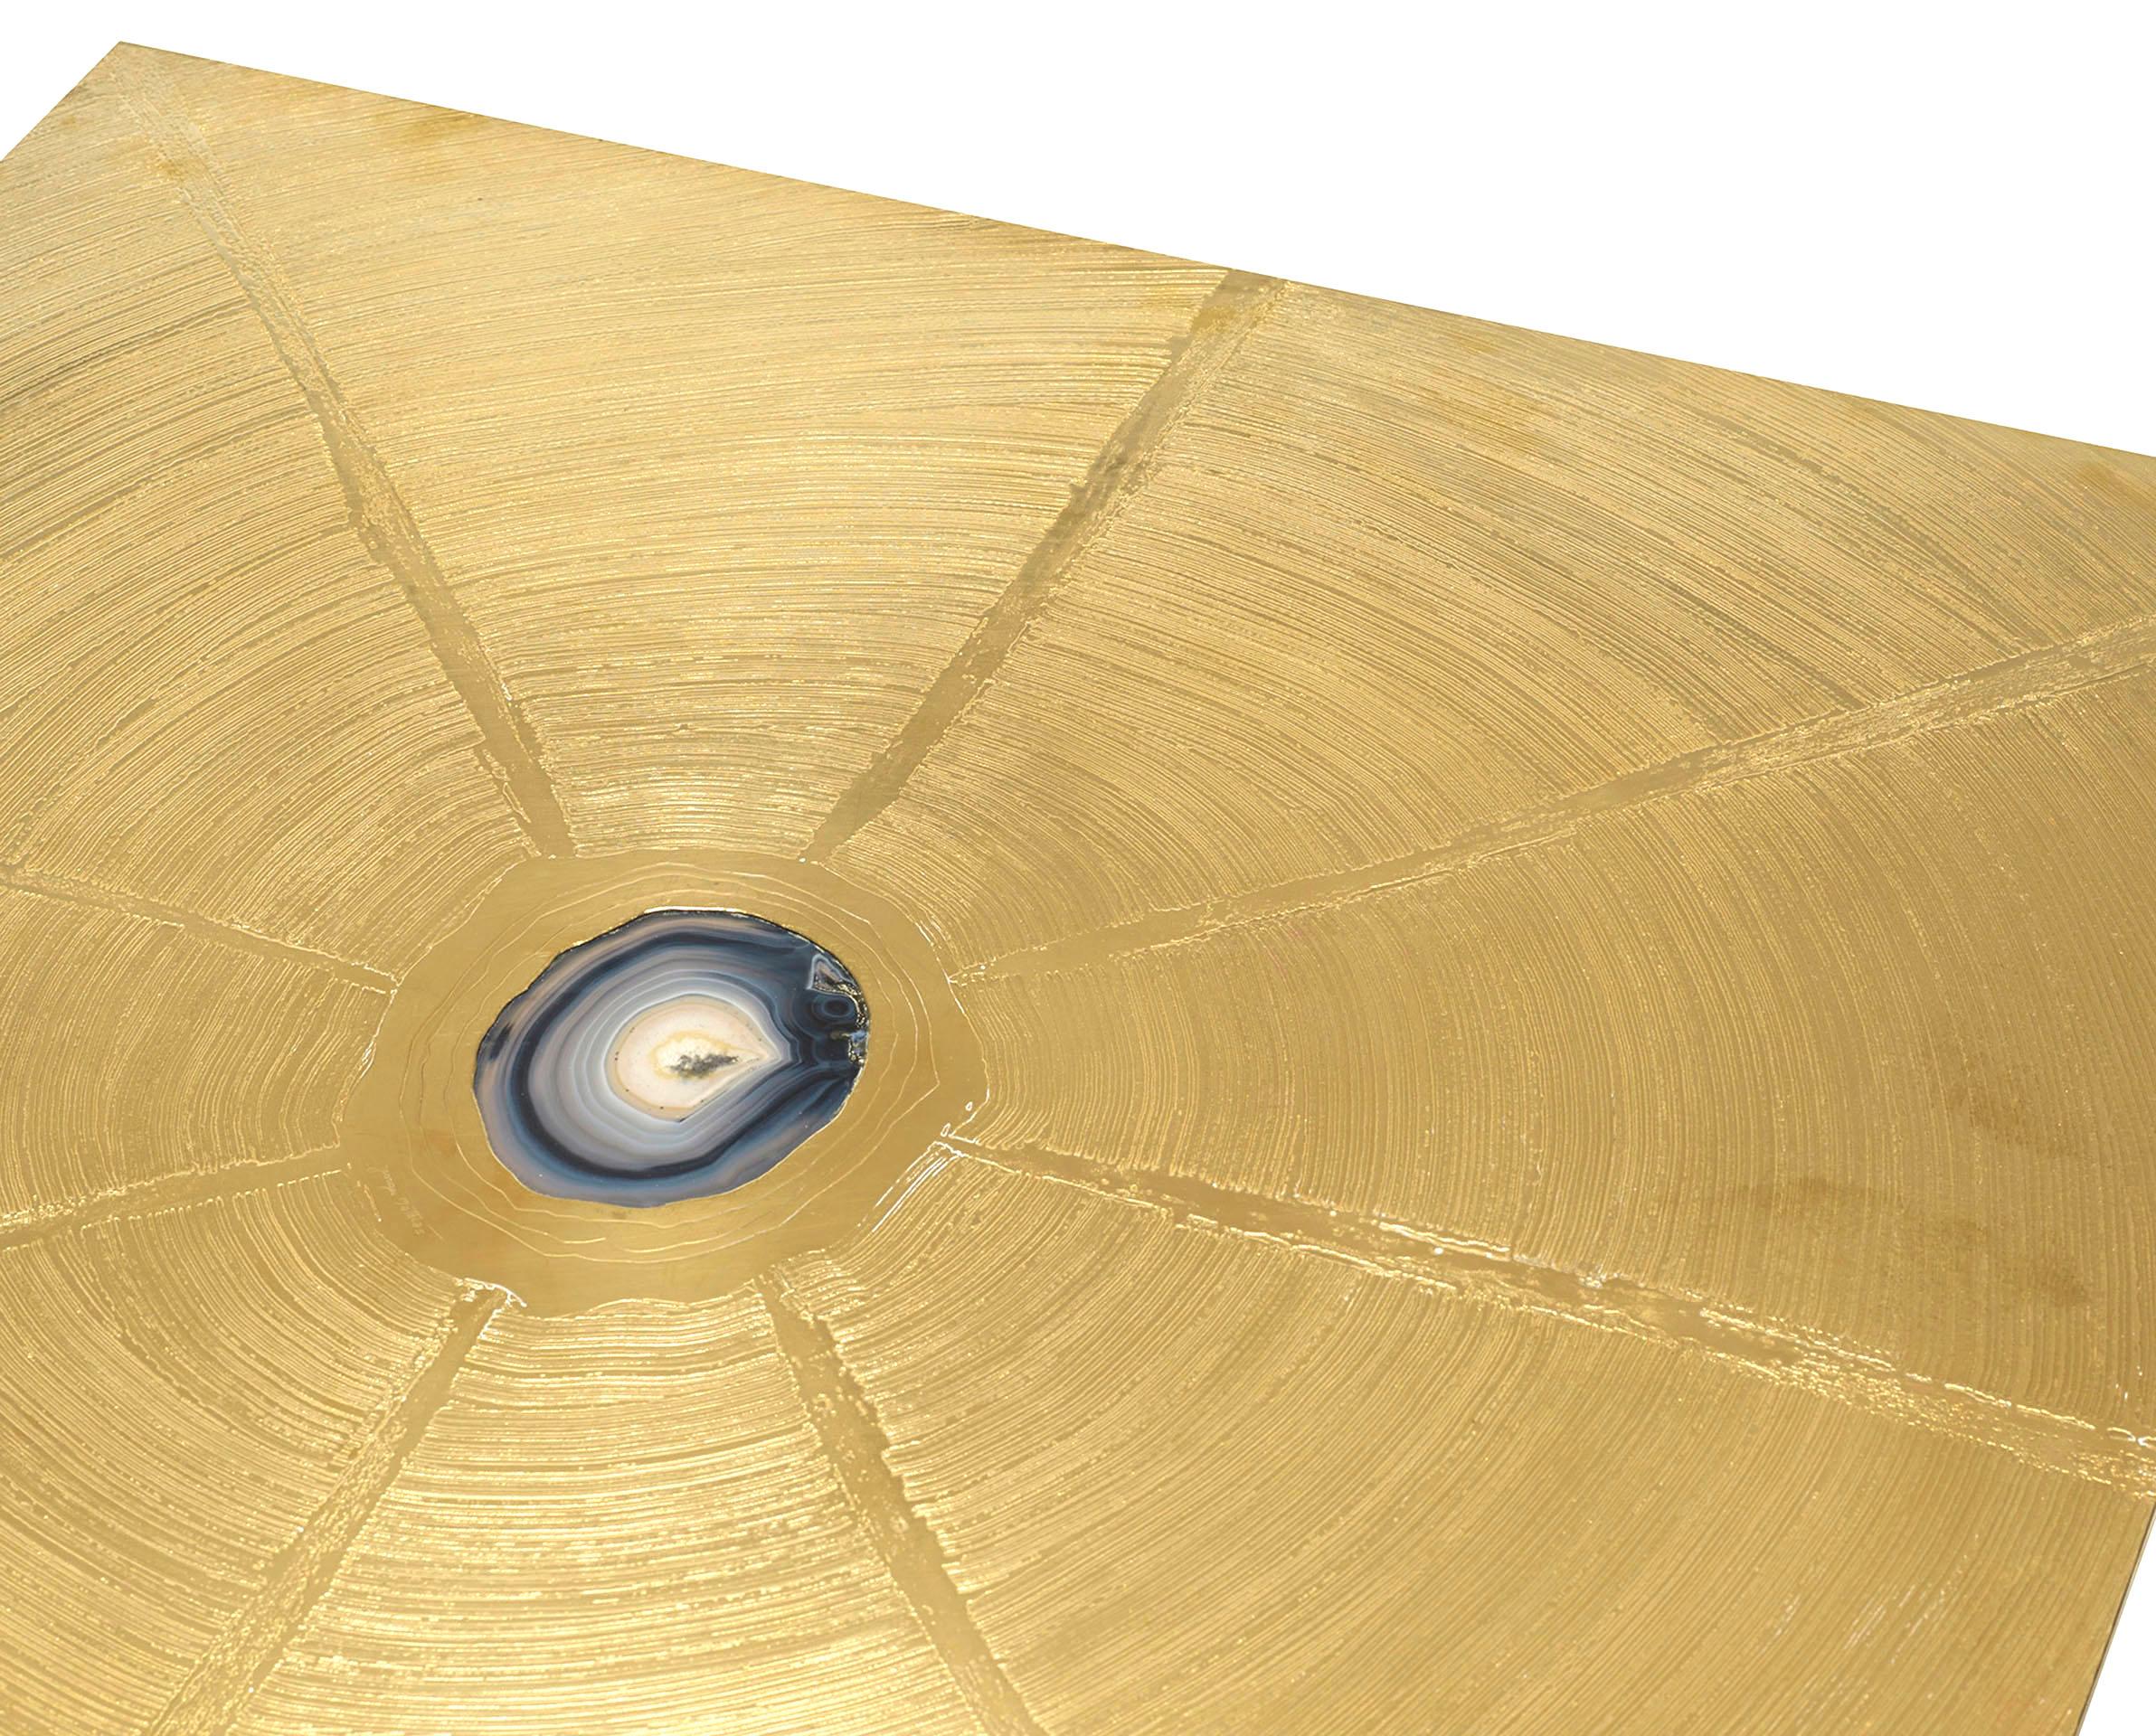 Belgian Modern (1980s) square acid etched brass coffee table with a centered inset agate stone on a pedestal base (signed on top GEORGE MATHIAS)
